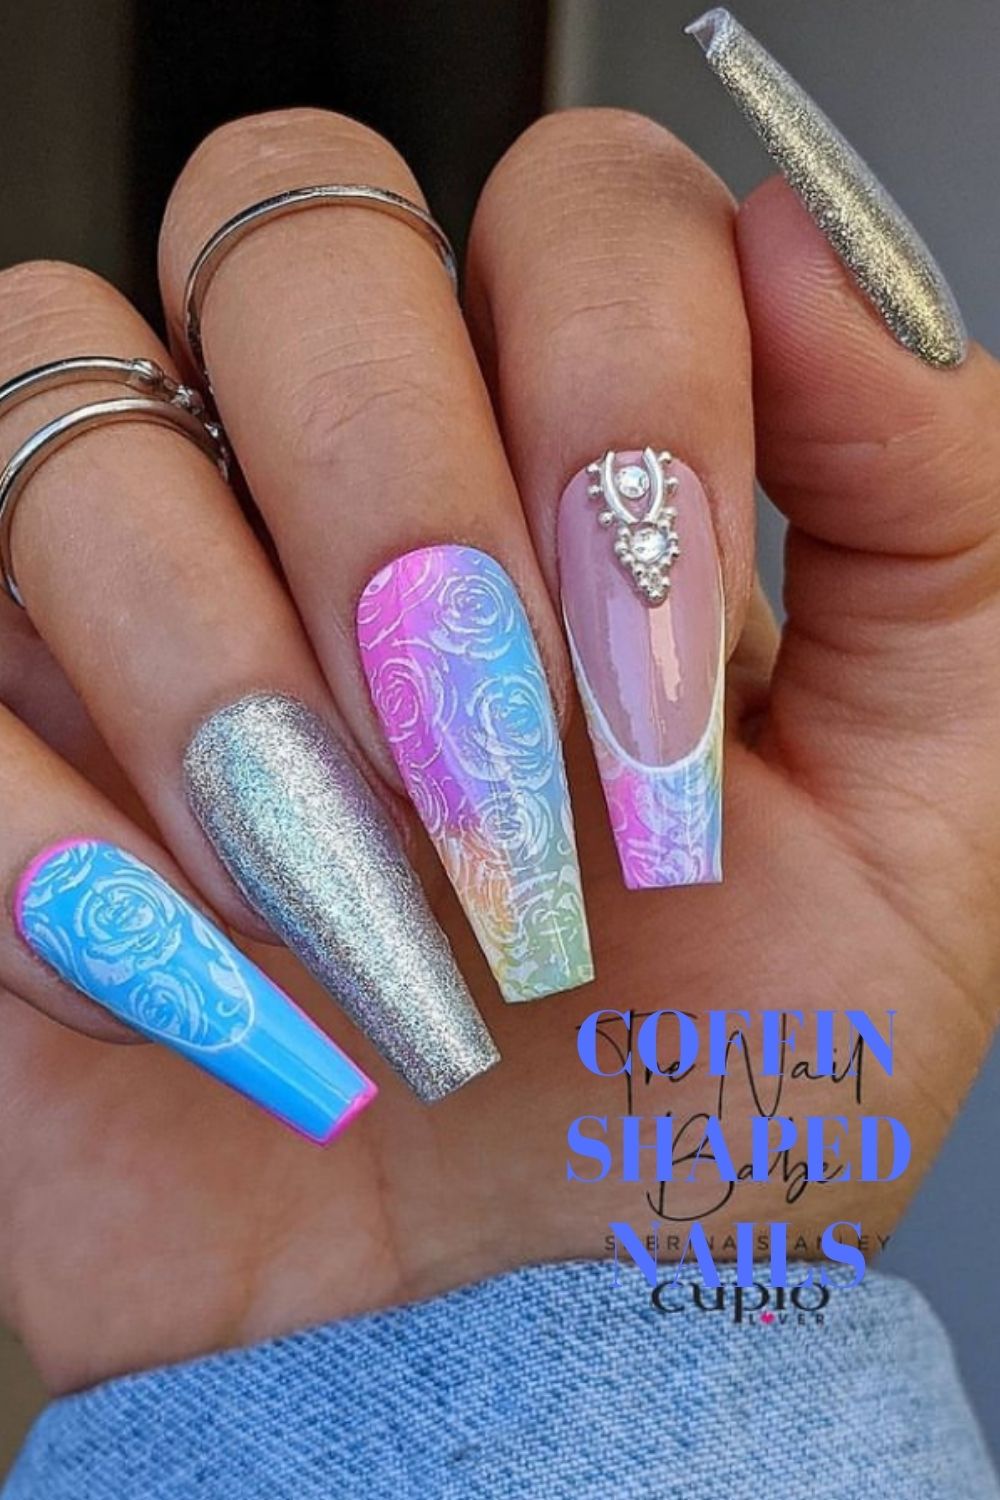 Silver coffin nails